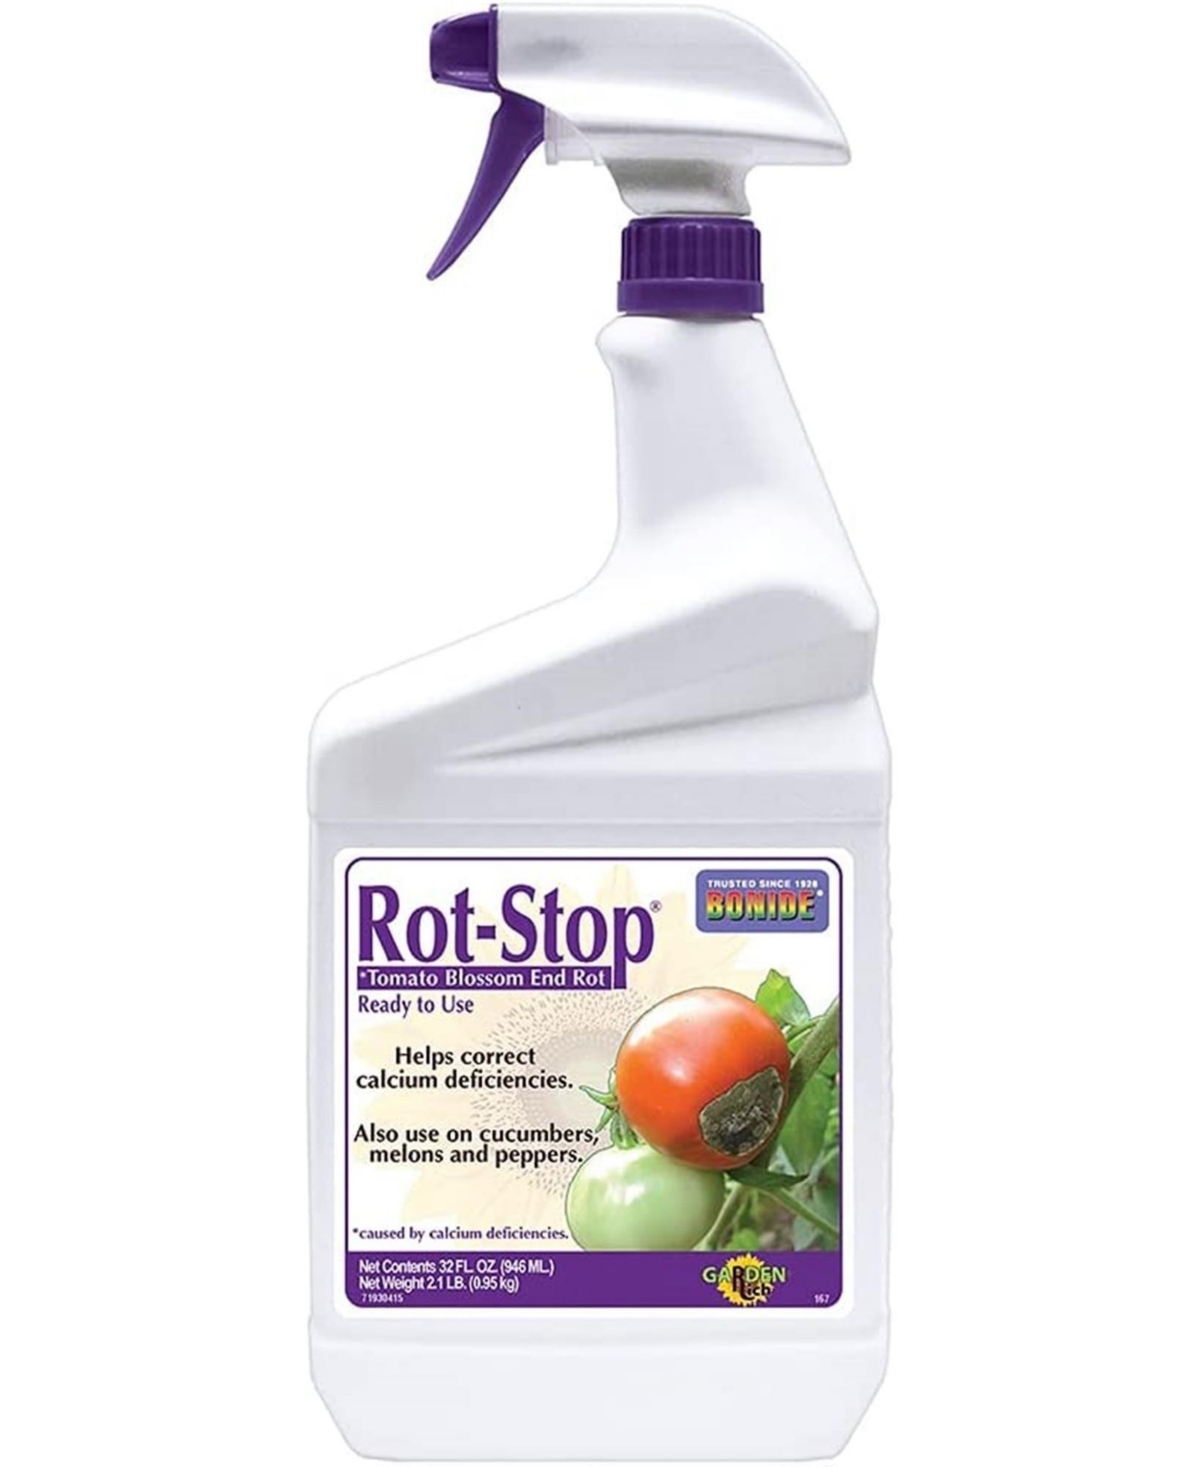 Bonide Rot-Stop Tomato Blossom End Rot, Ready to Use, 32 oz